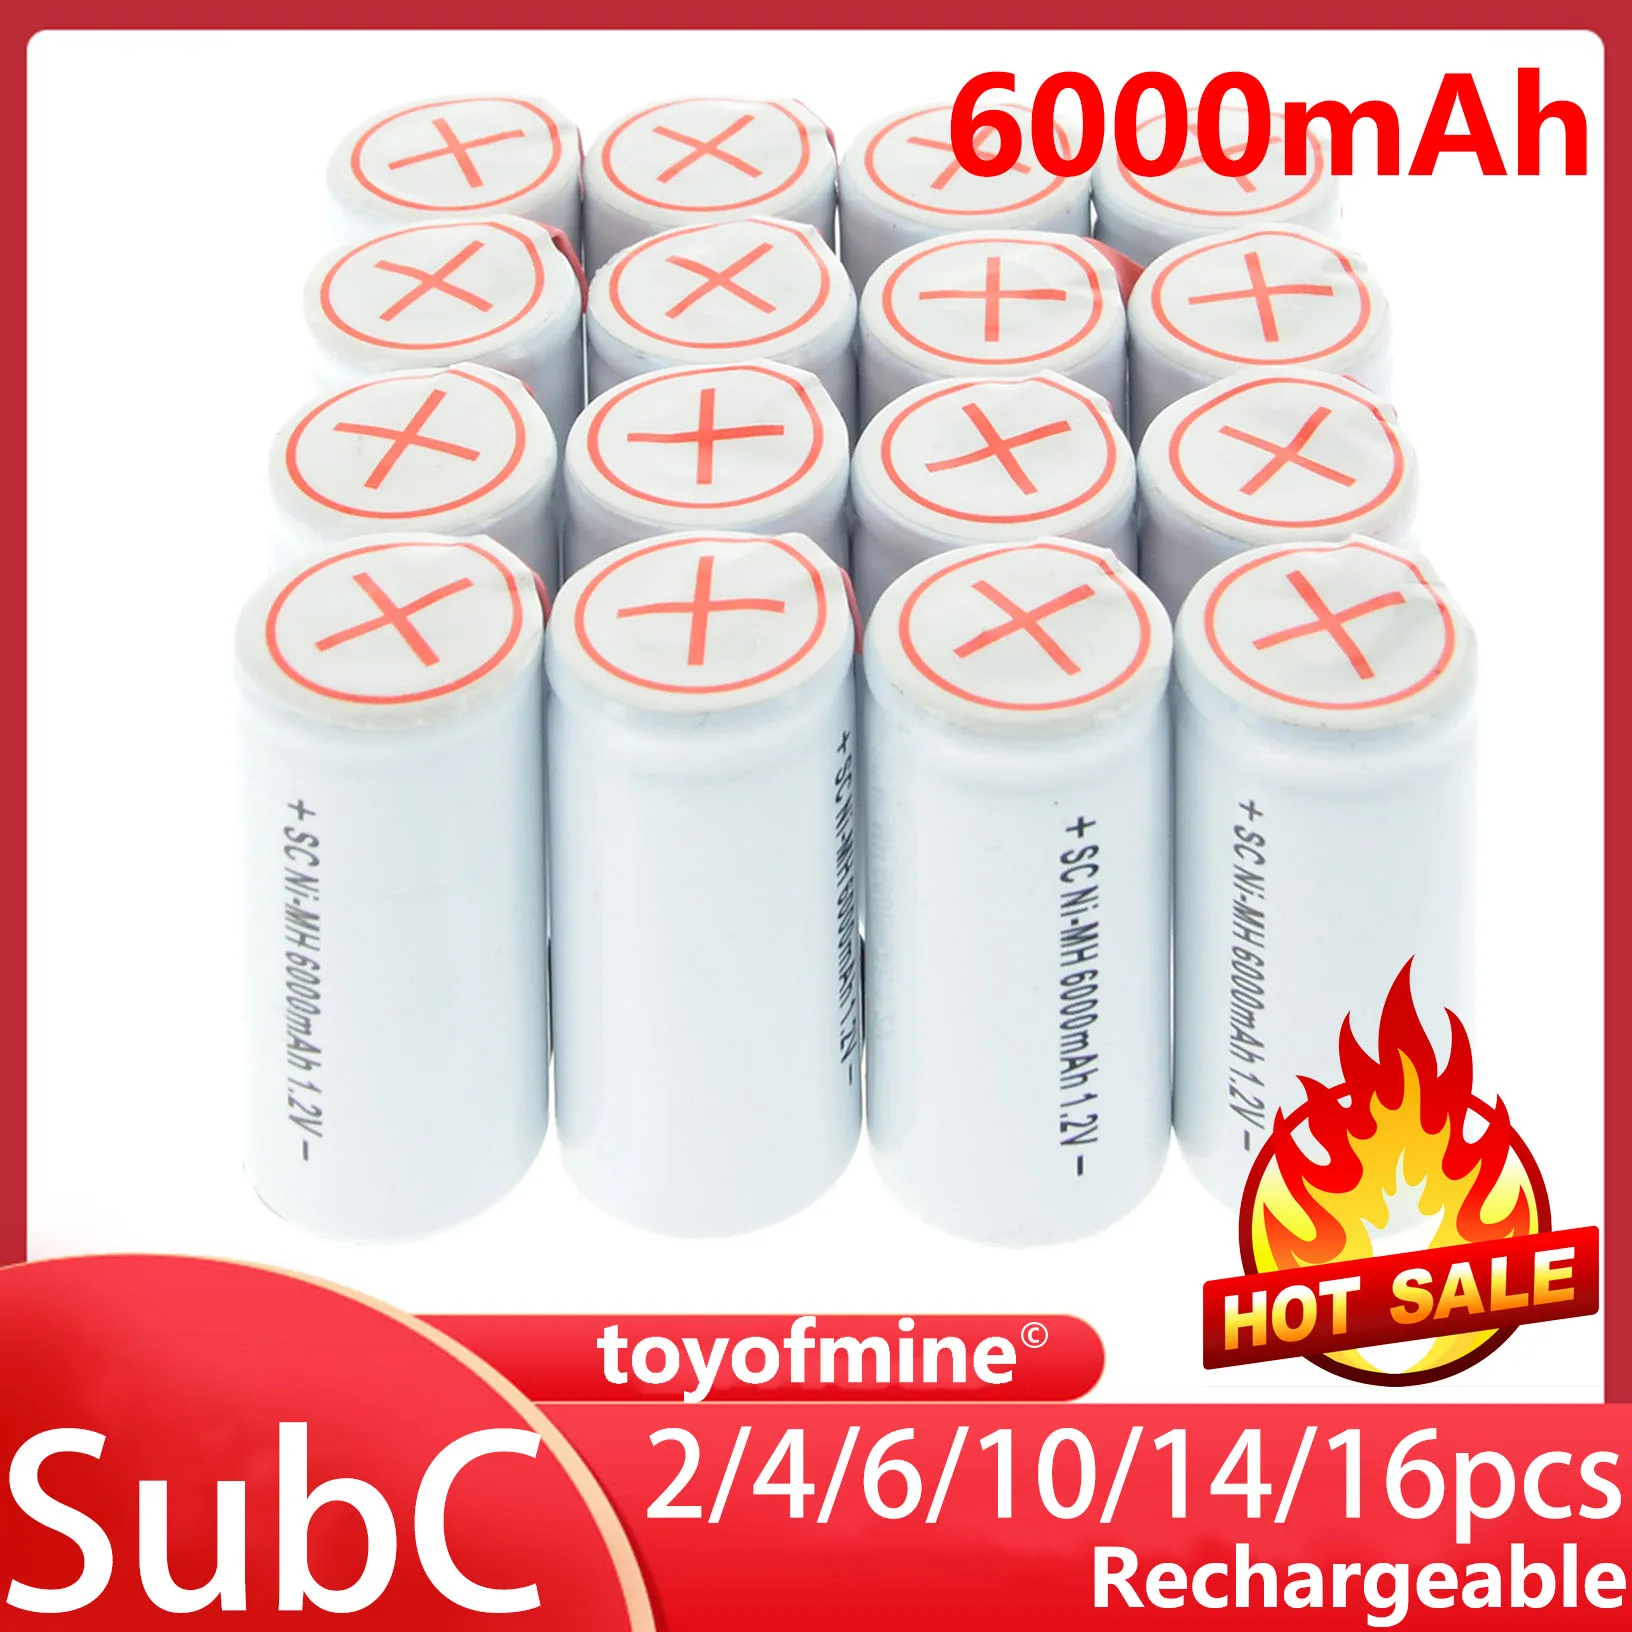 

2/4/6/10/14/16pcs Sub C SubC With Tab 6000mAh 1.2V Ni-MH Rechargeable Battery White High Power